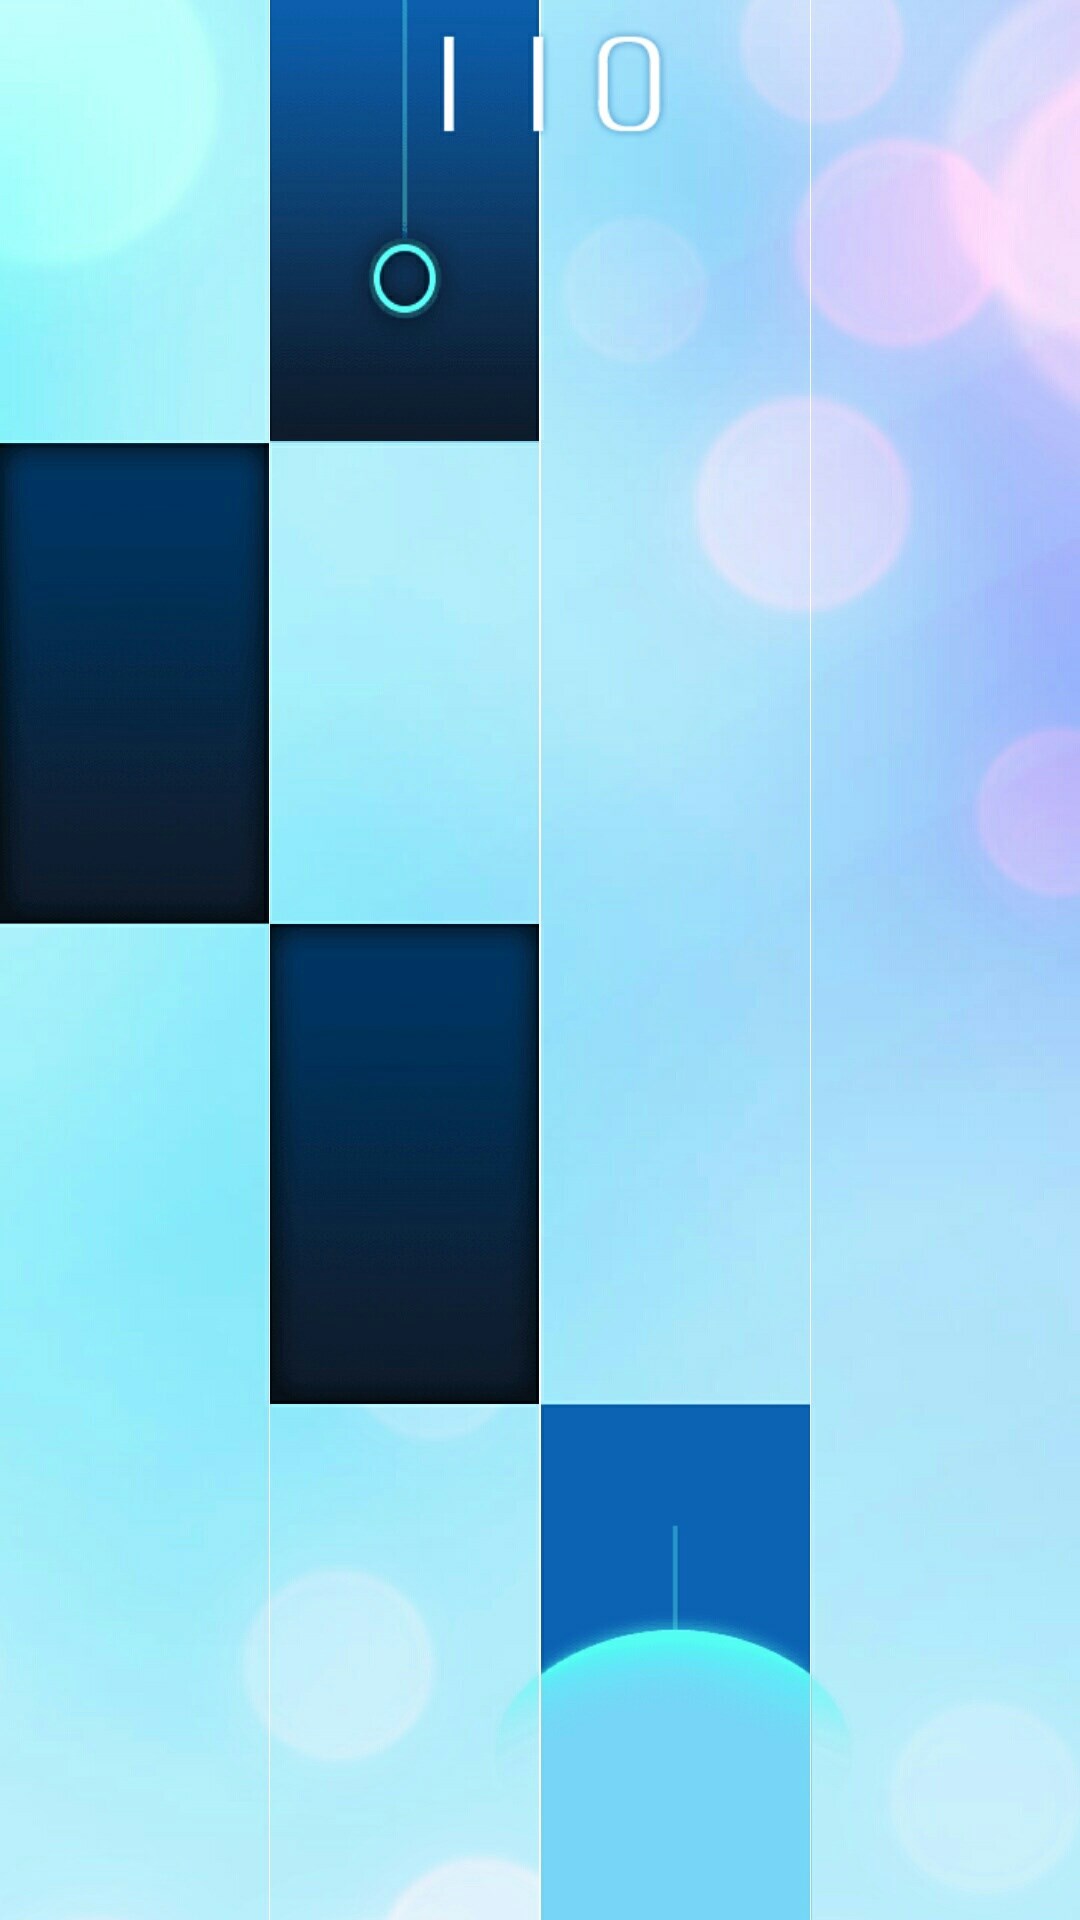 Piano Game Classic - Challenge Music Tiles for android instal